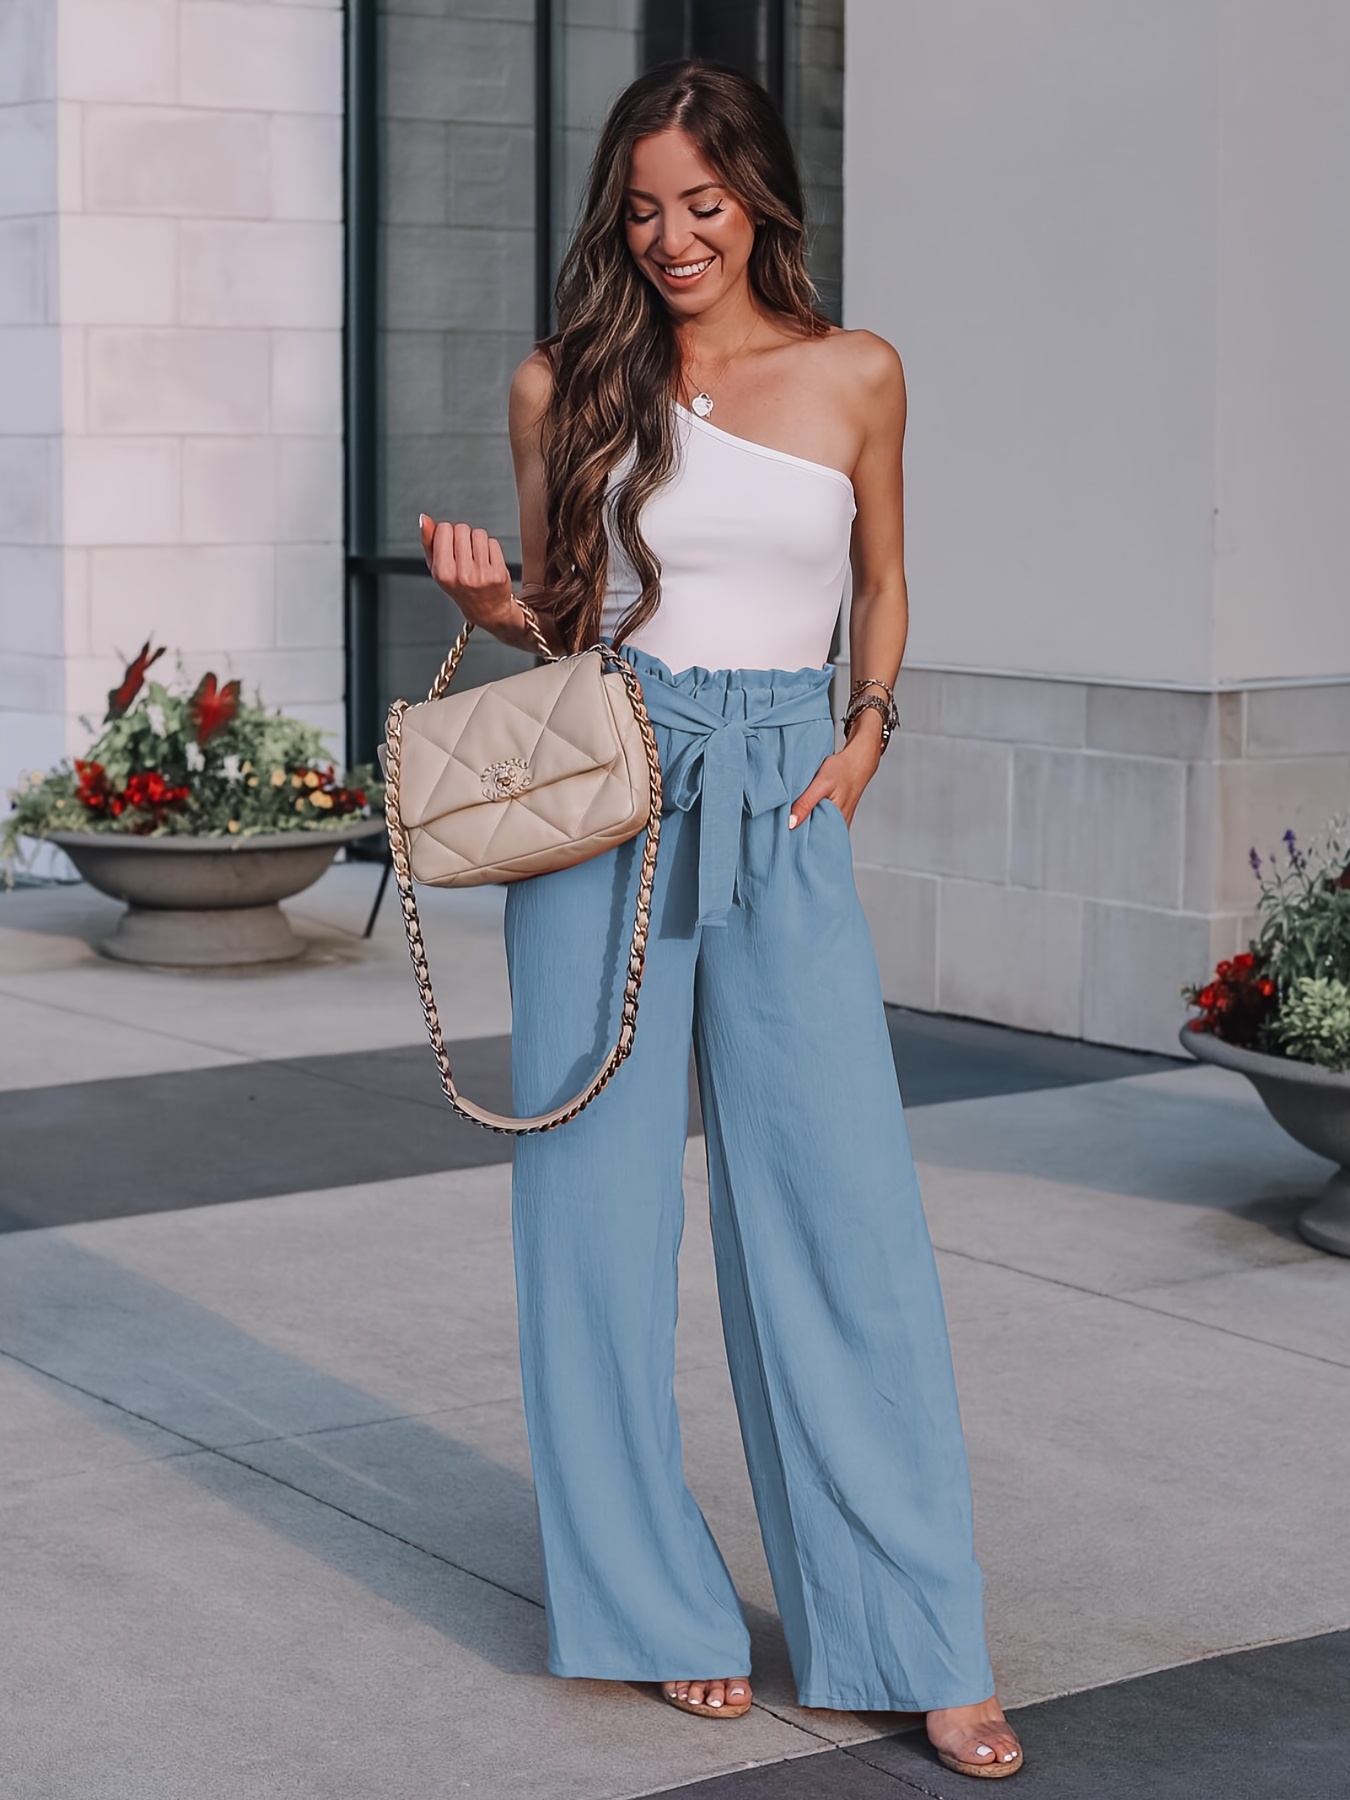 Teal Pants Outfits For Women (235 ideas & outfits)